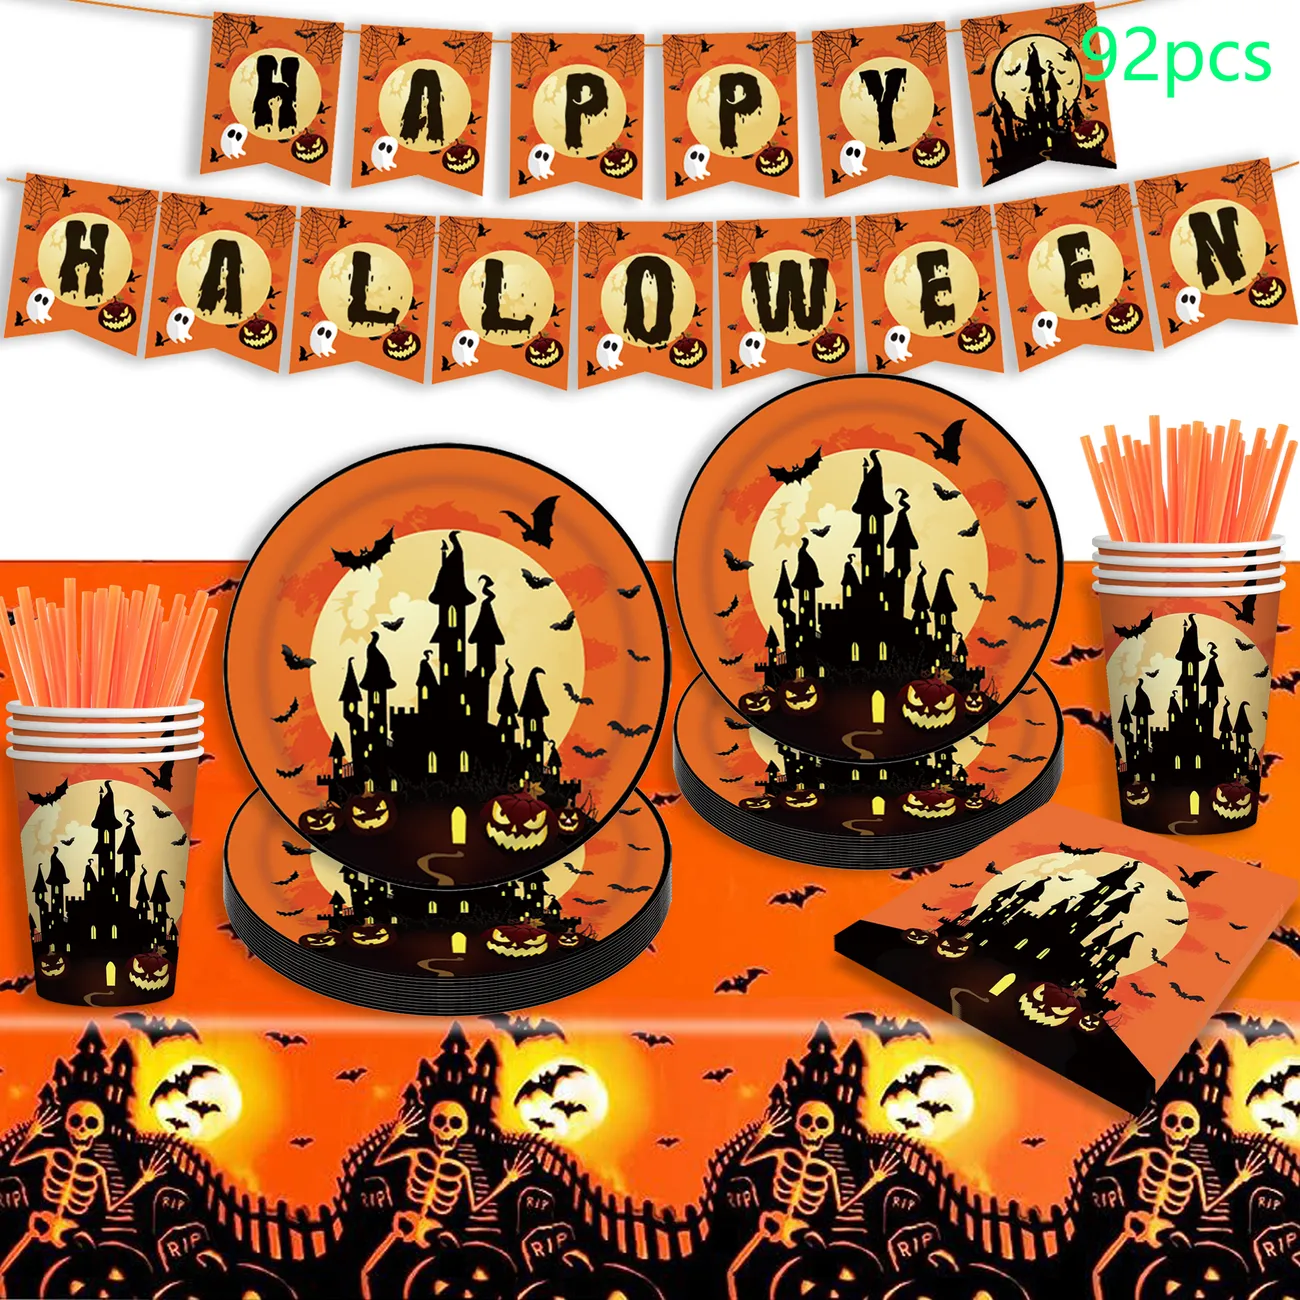 Orange Halloween Themed Party Decoration Set with Castle and Pumpkin Design  big image 1